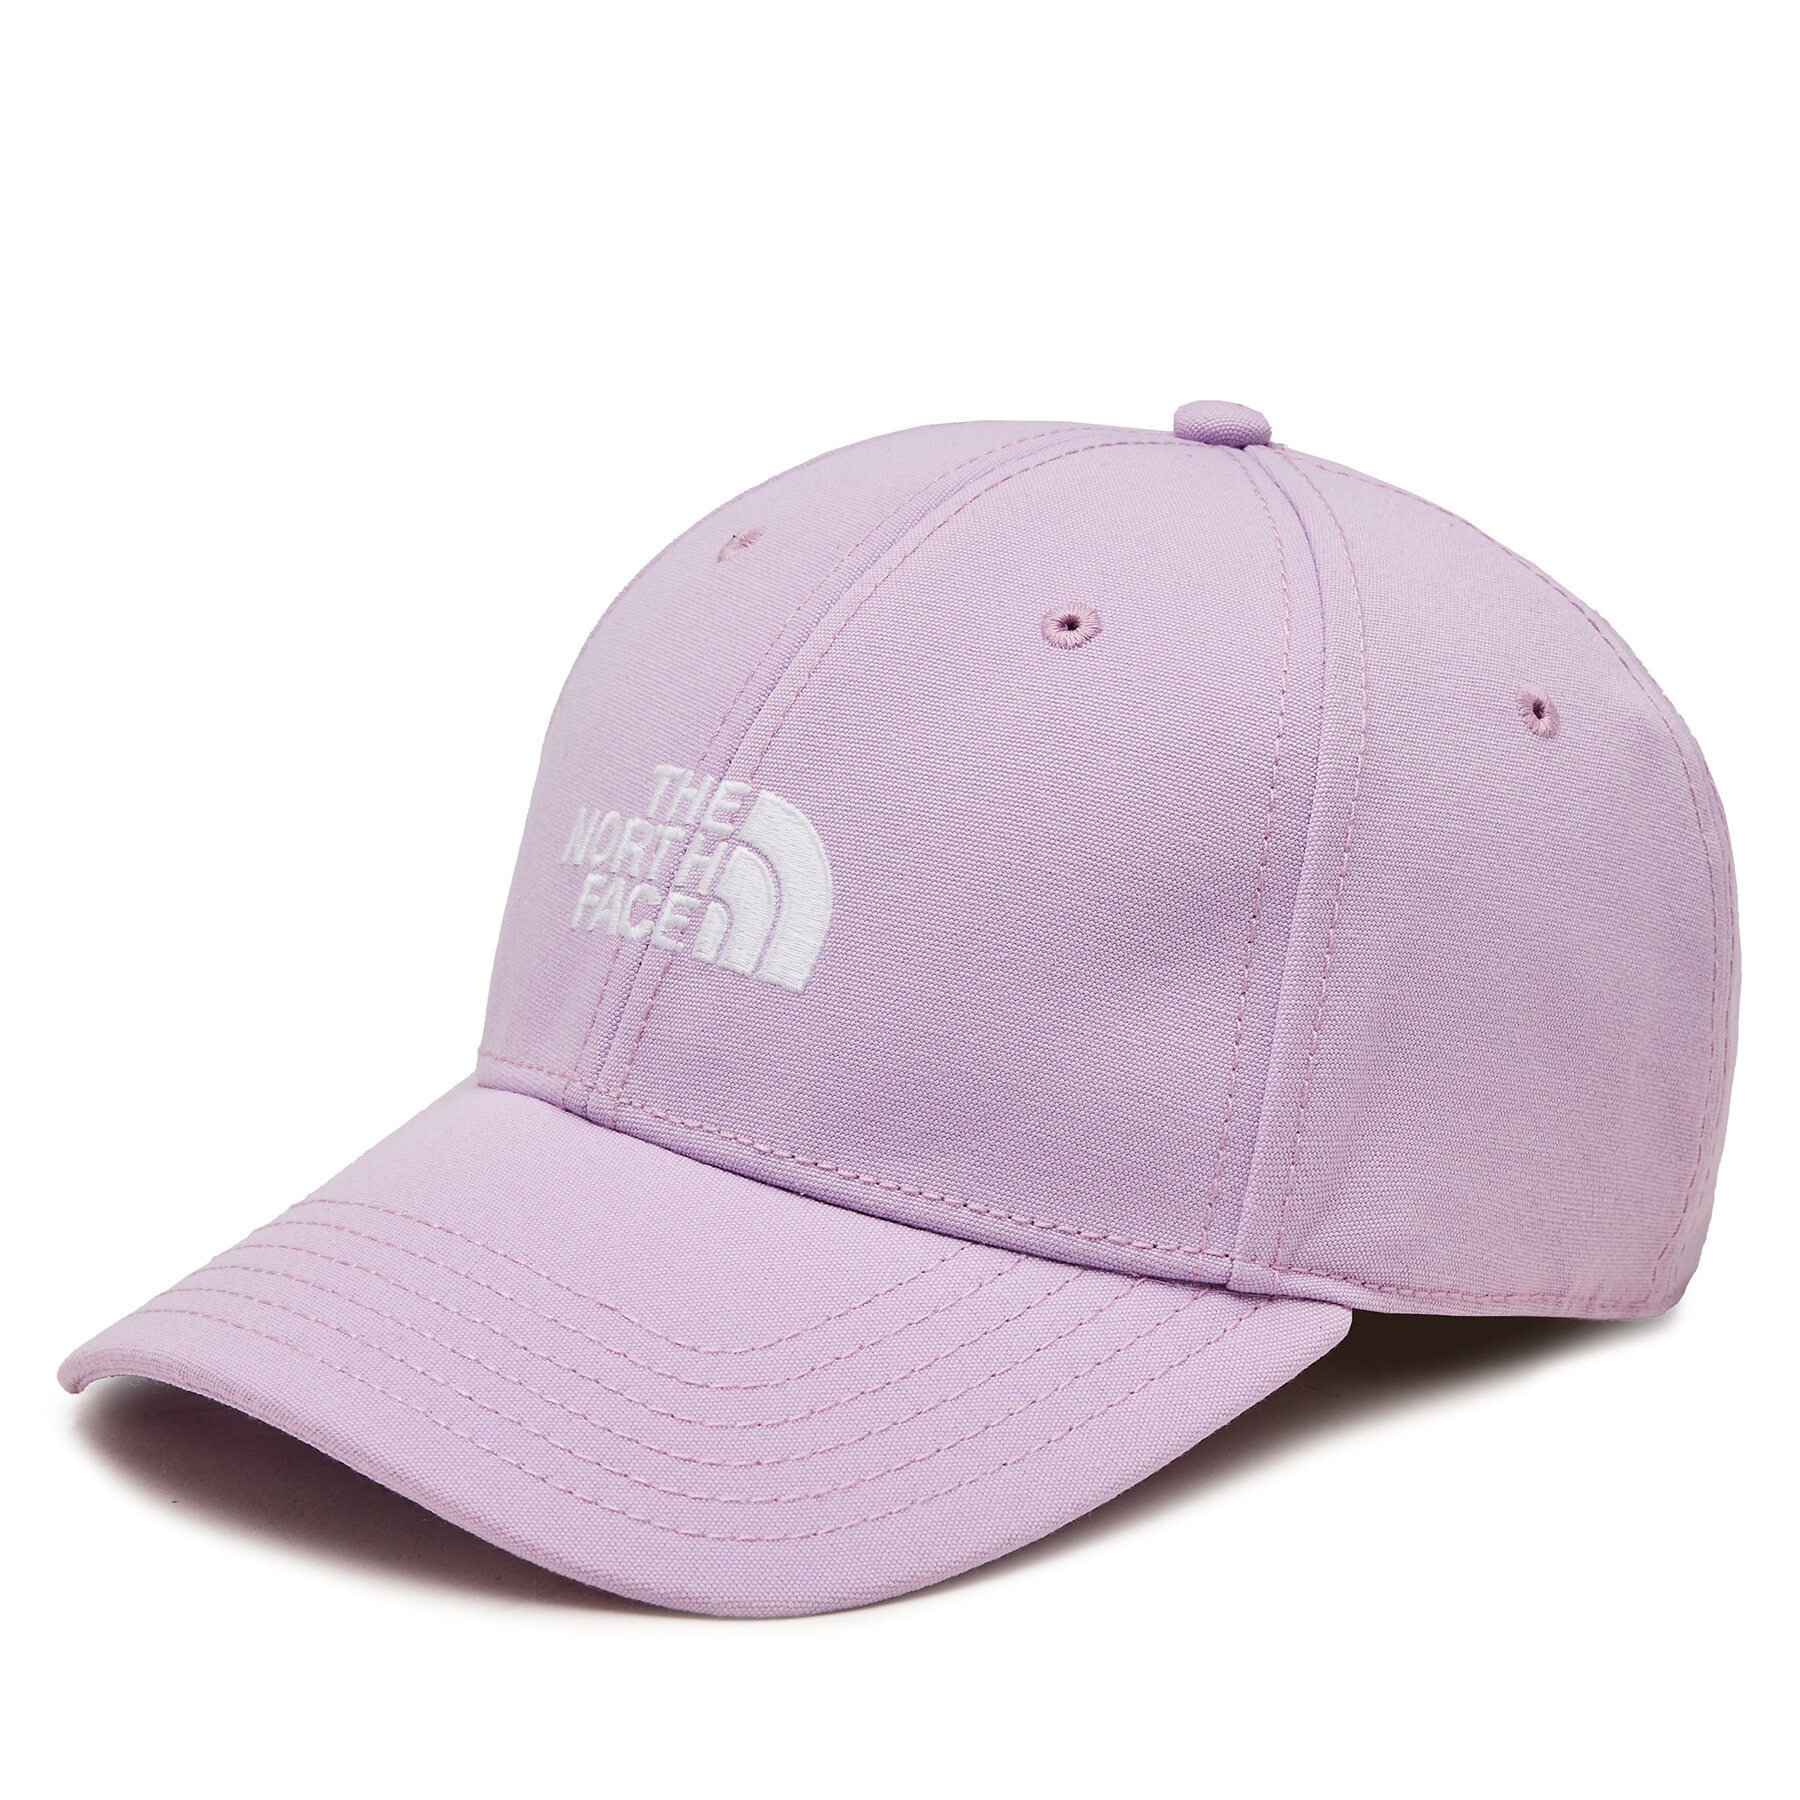 Cap The North Face Recycled 66 Classic Hat NF0A4VSVHCP1 Lupine von The North Face